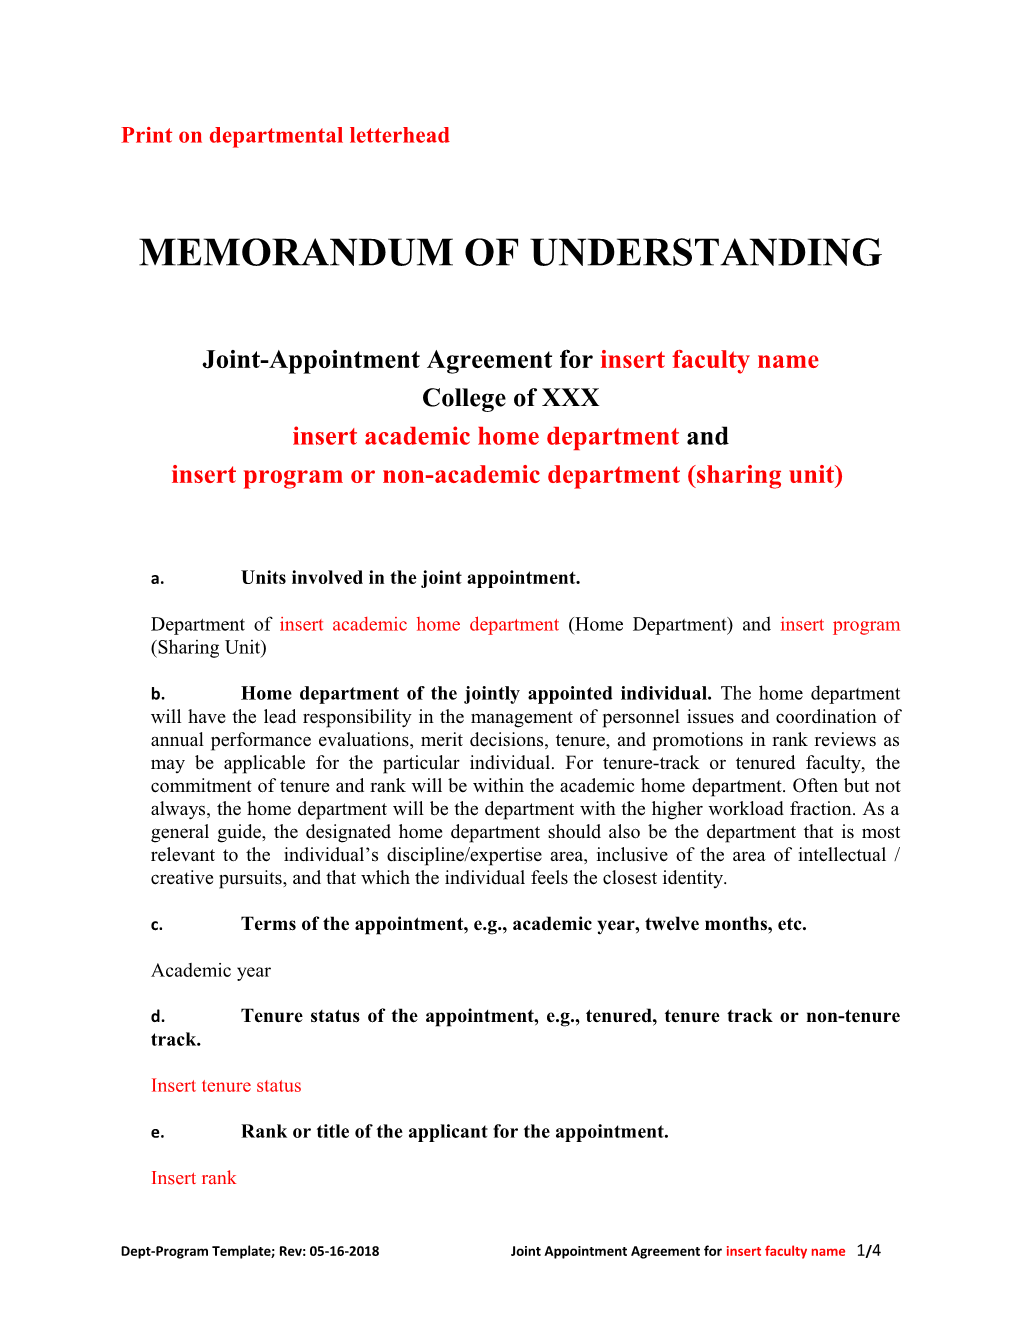 Joint-Appointment Agreement for Insert Faculty Name